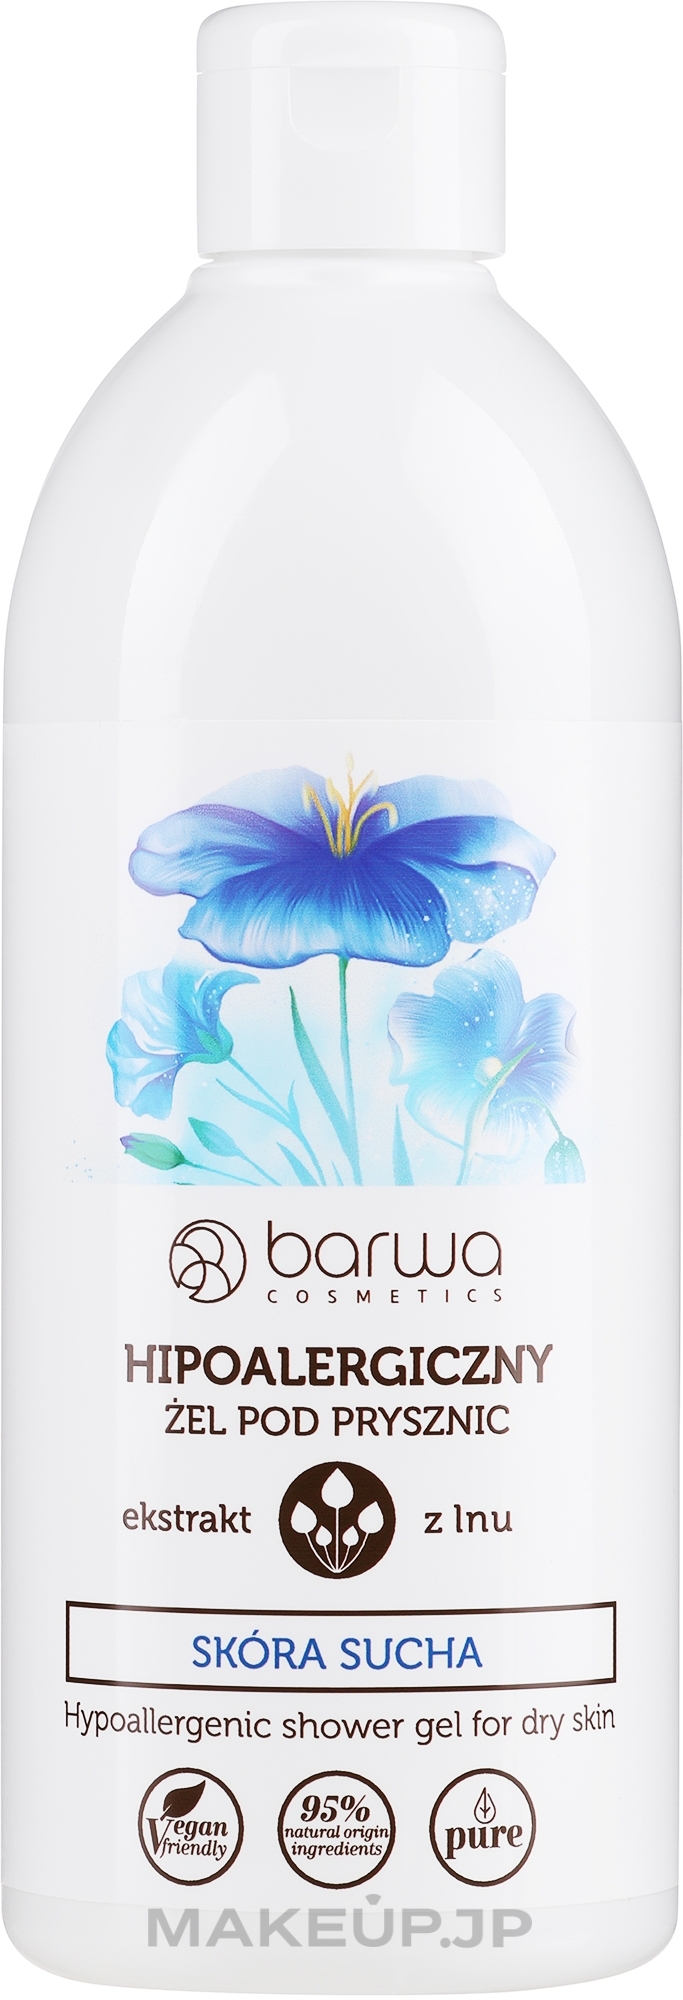 Hypoallergenic Shower Gel with Flax Extract - Barwa Hypoallergenic Shower Gel — photo 400 ml